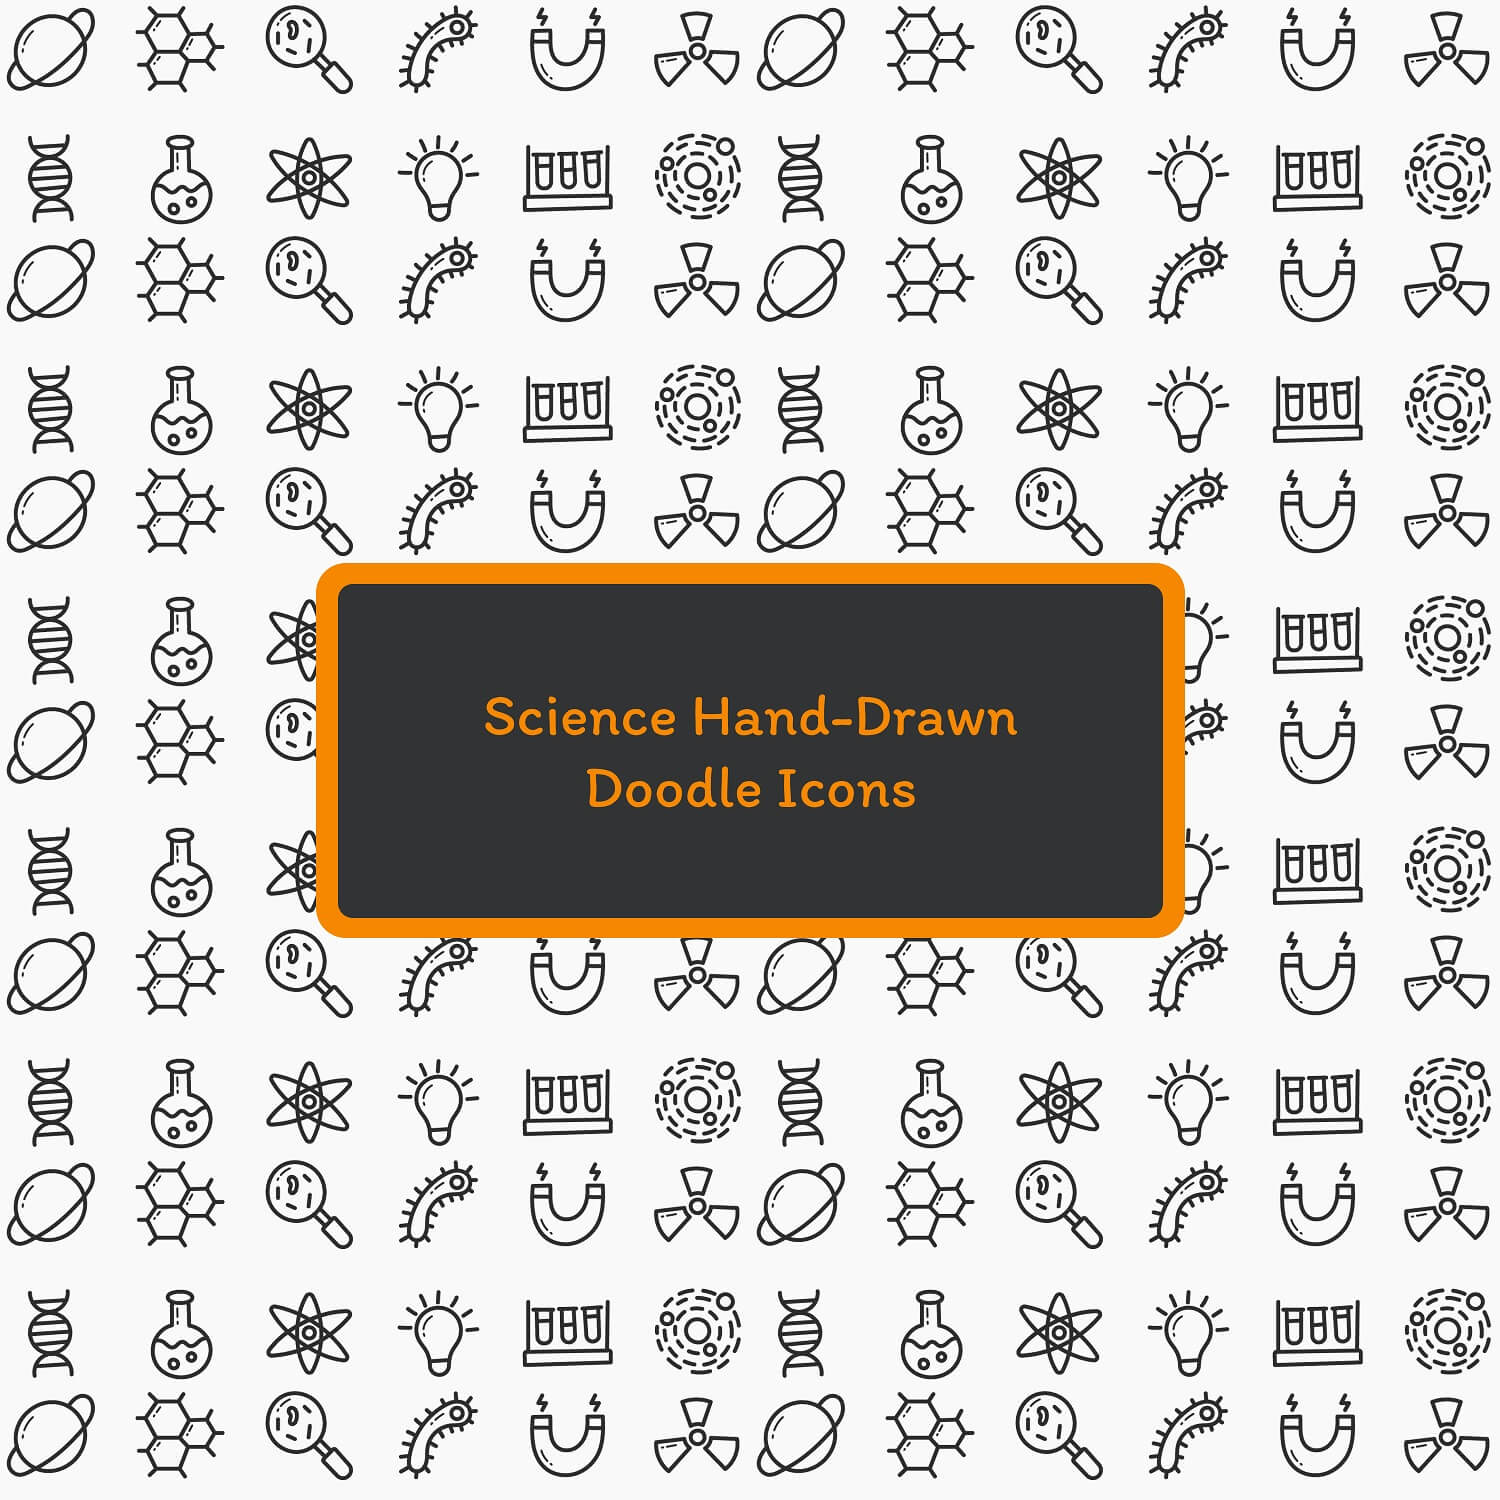 Science Hand-Drawn Doodle Icons.